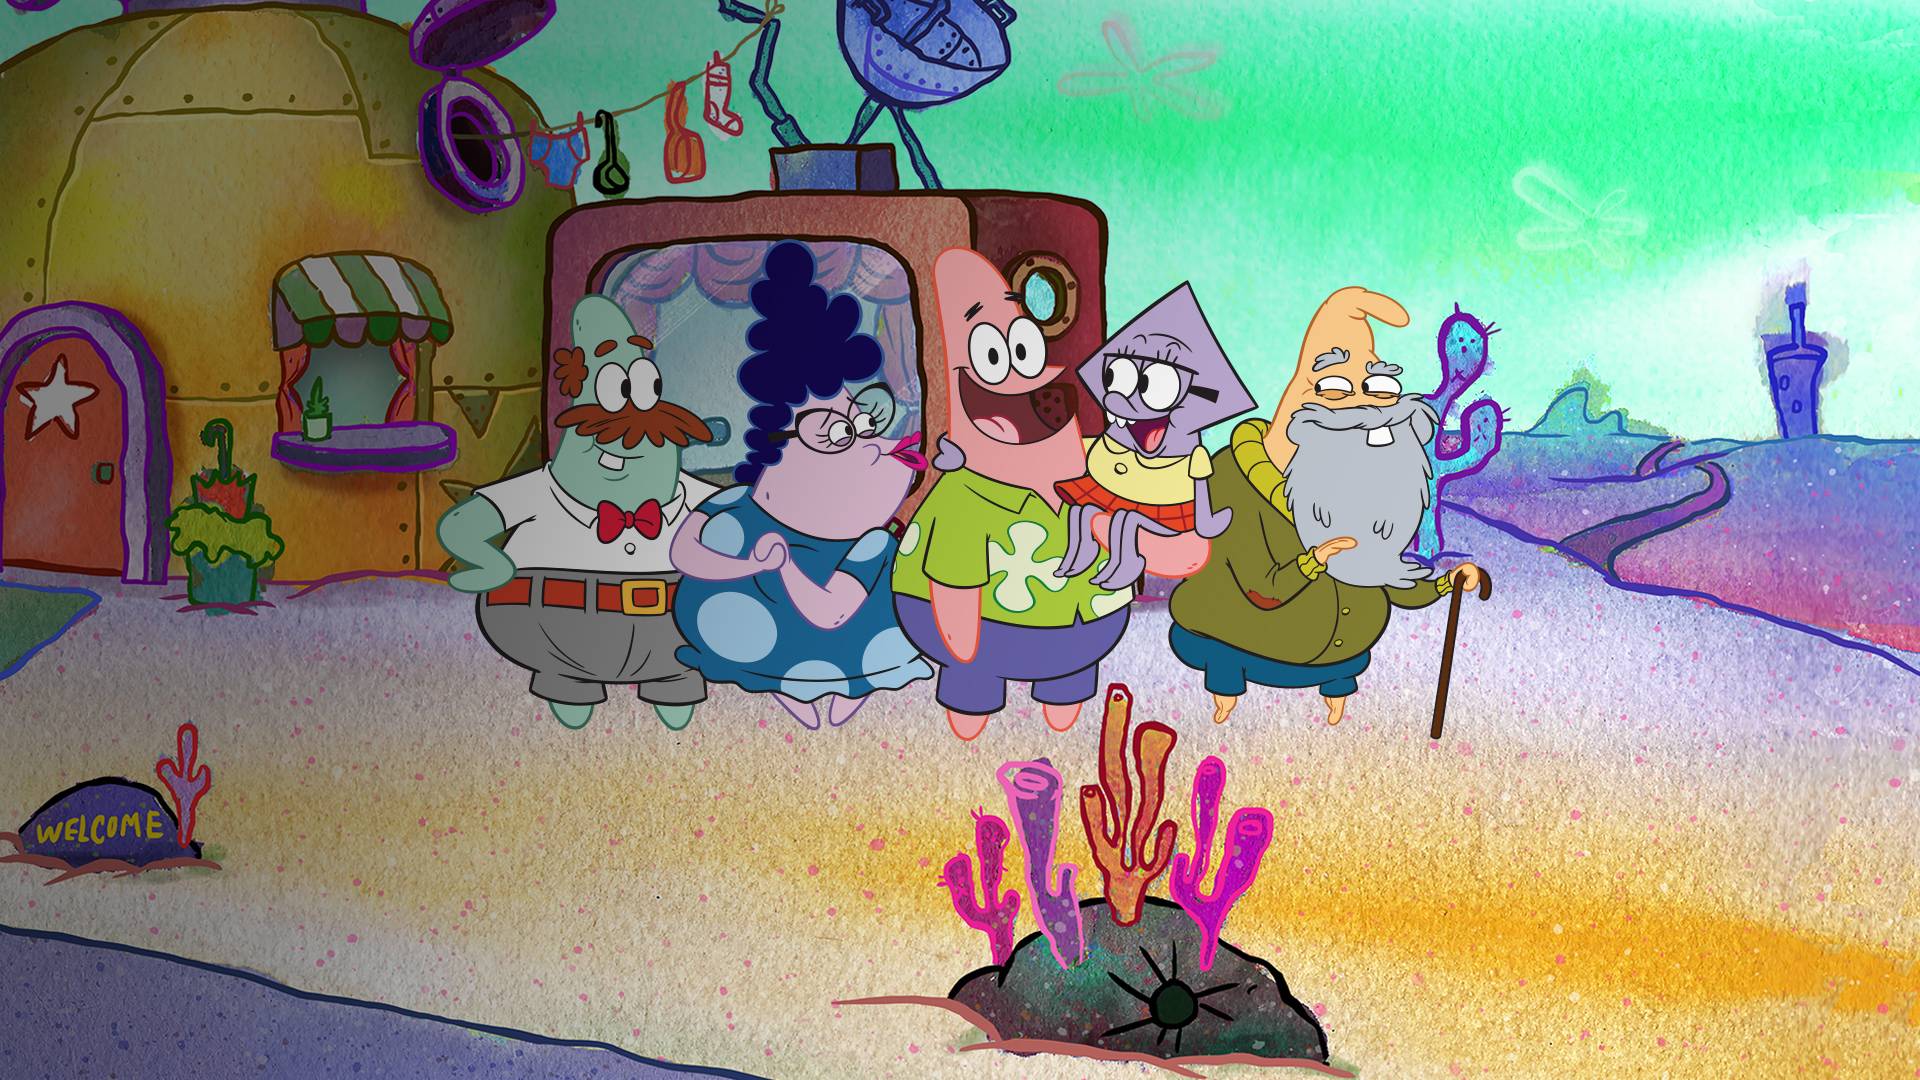 Will SpongeBob Be in 'The Patrick Star Show'? They Are BFFs After All